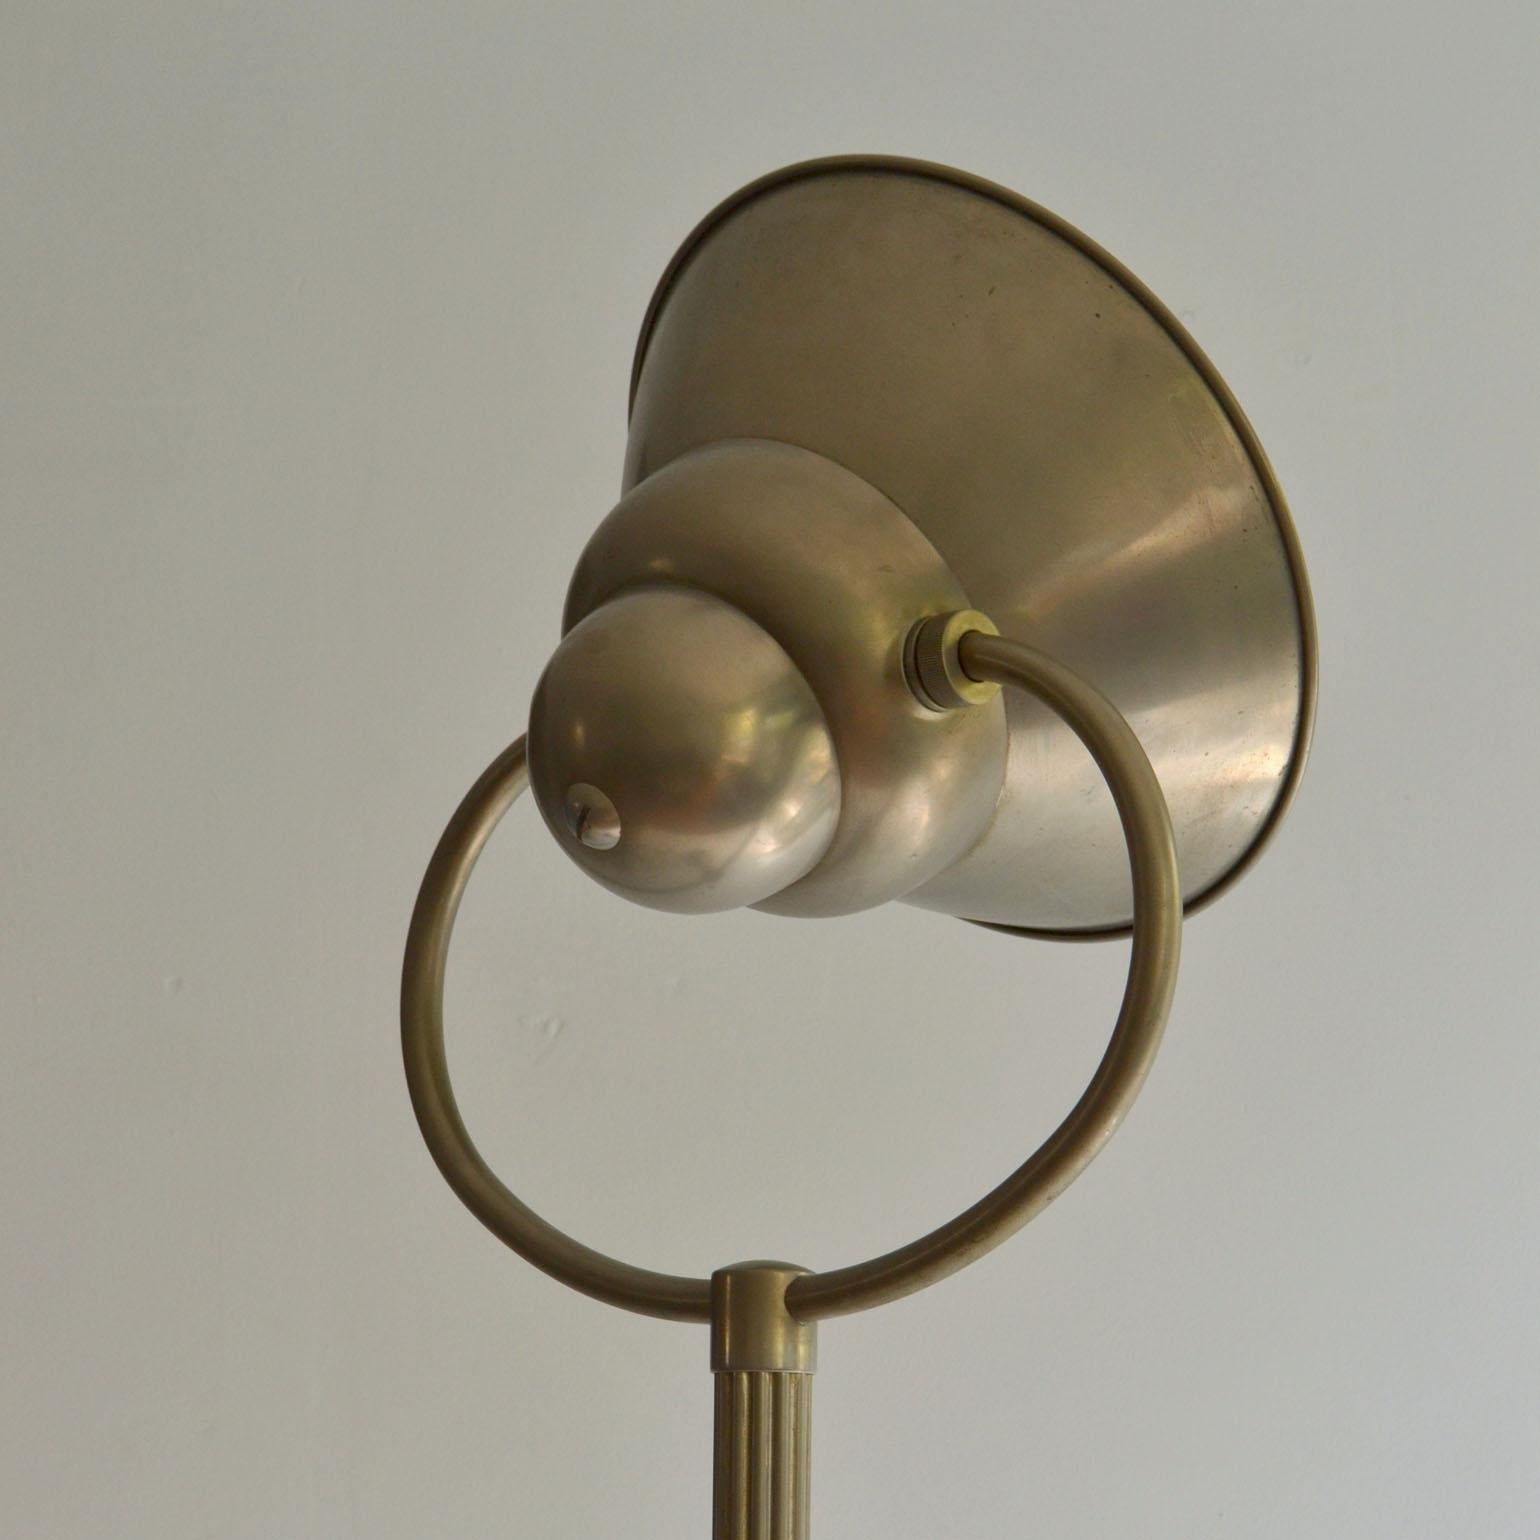 Art Deco Floor Lamp 1920's with Adjustable Shade in Nickel Attributed to Gispen  For Sale 3